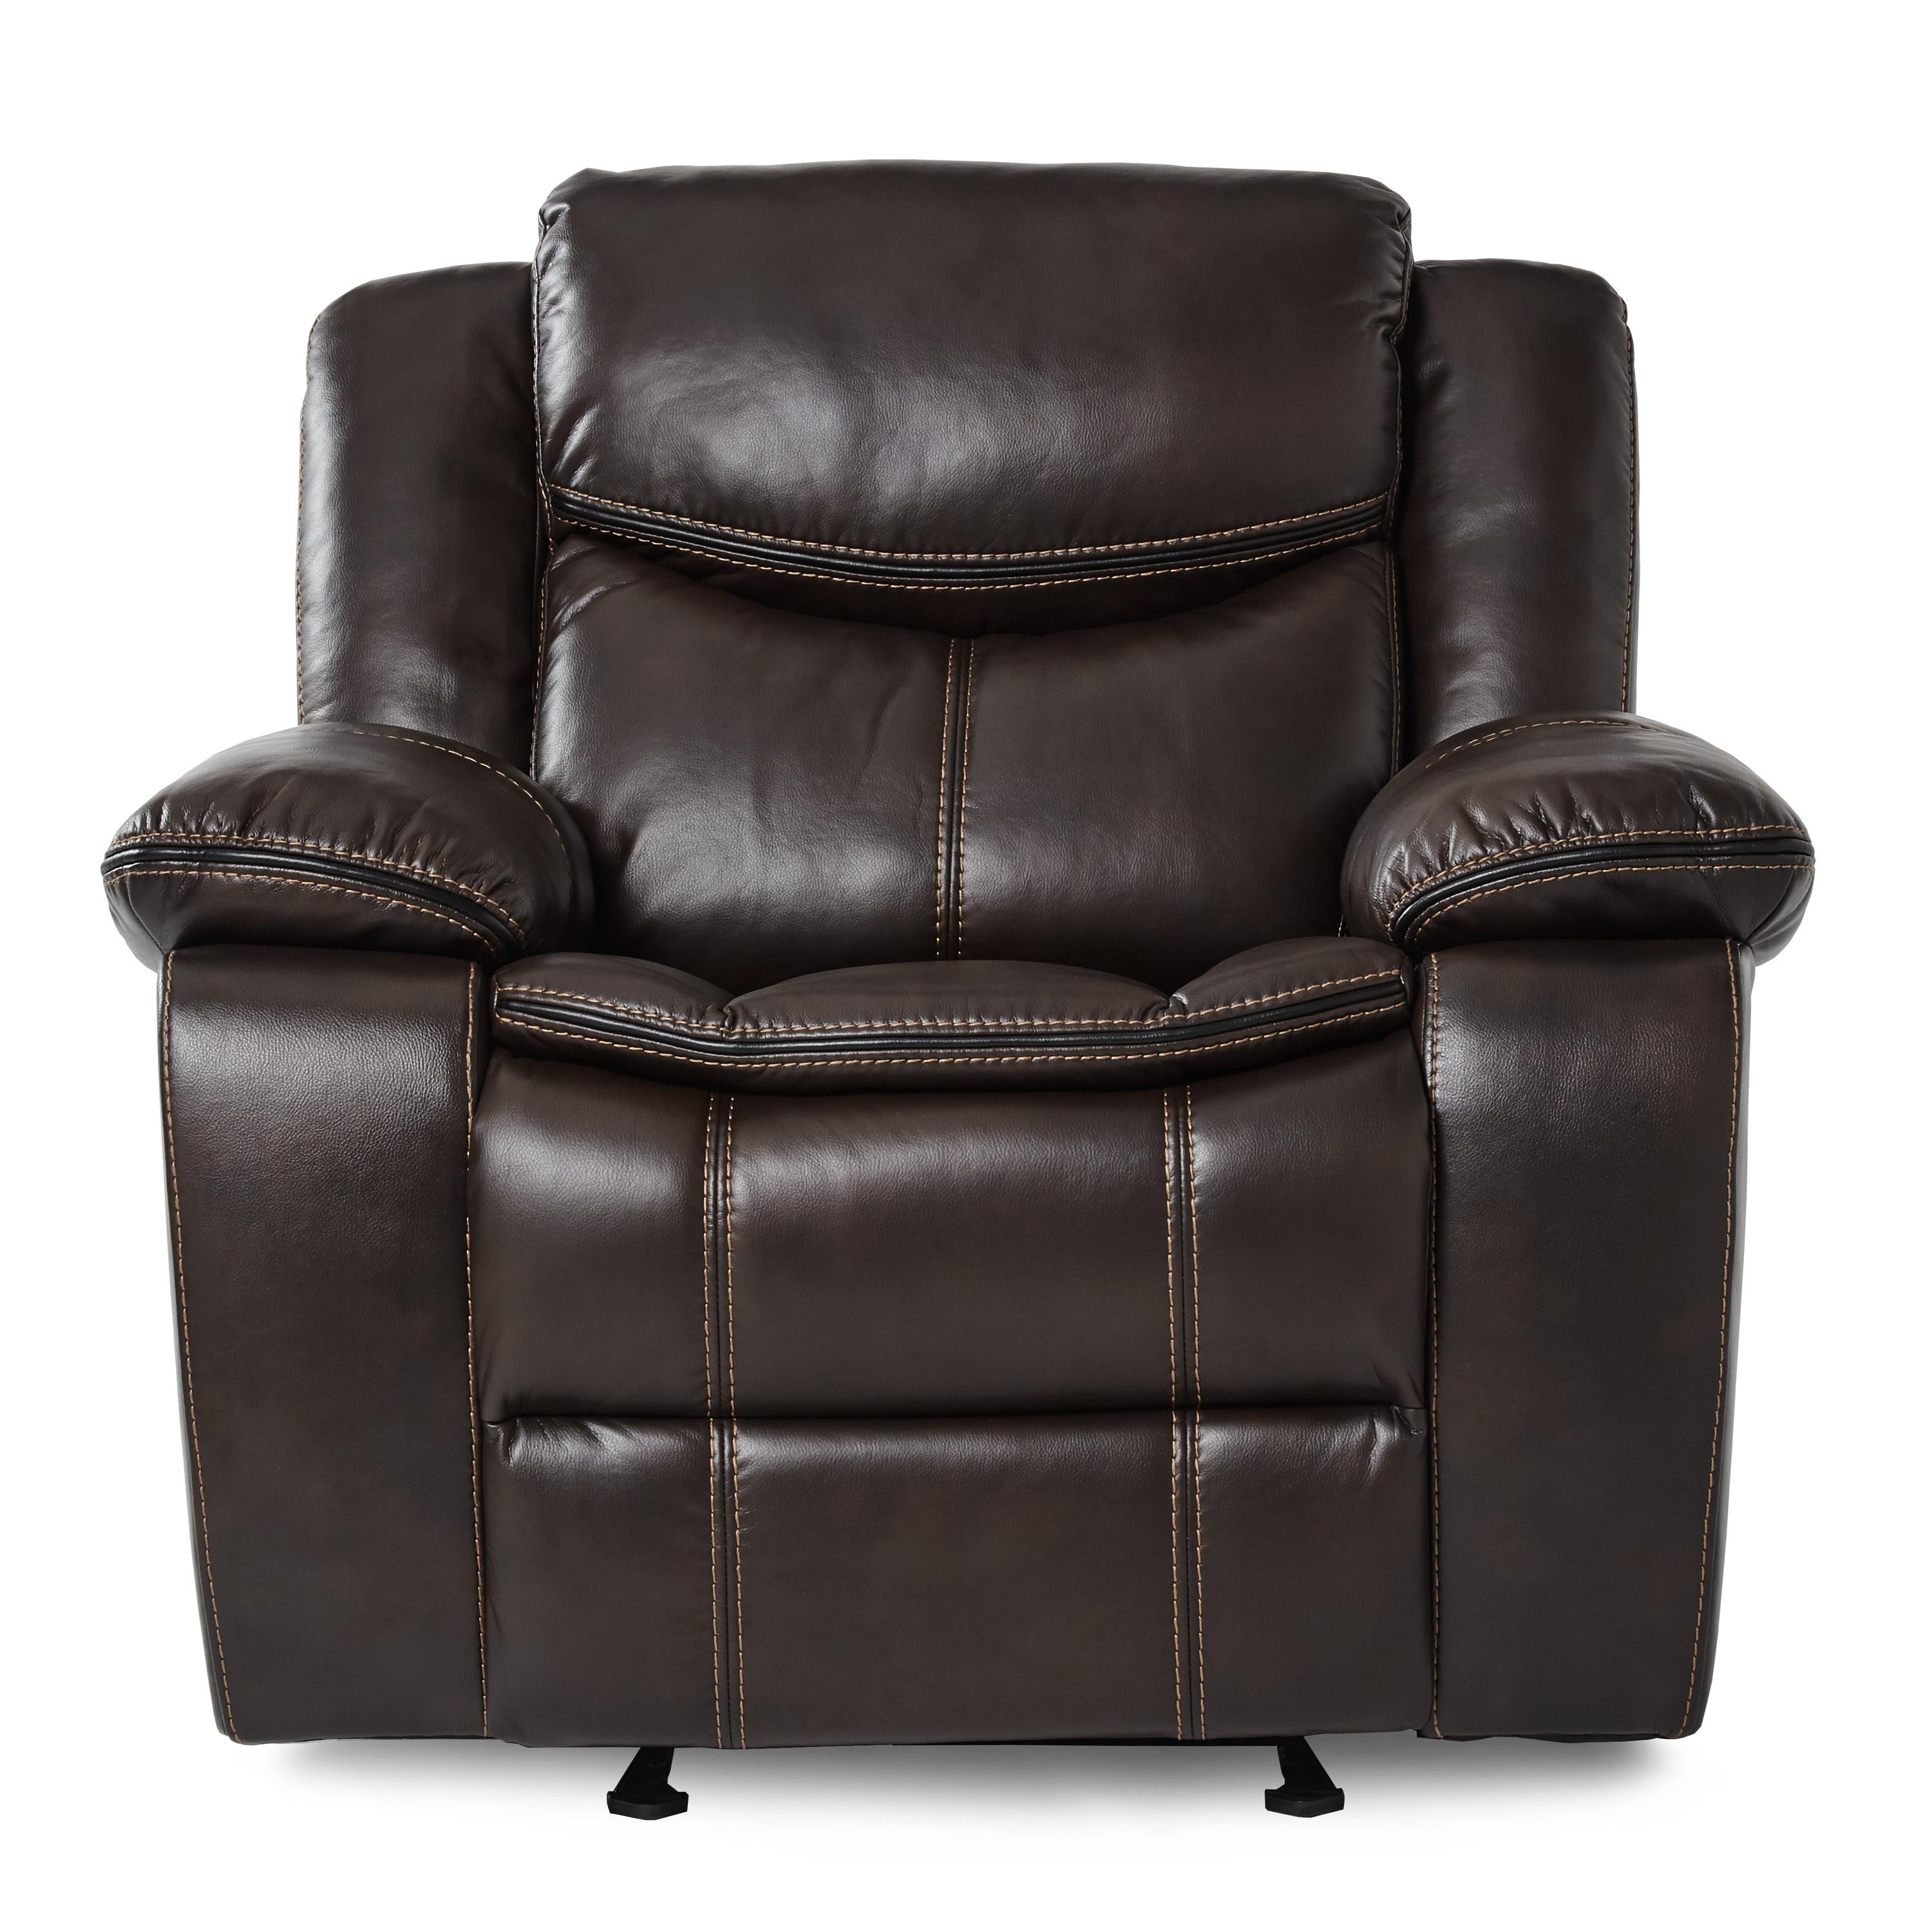 

    
Transitional Brown Faux Leather Reclining Chair Homelegance 8230BRW-1 Bastrop
